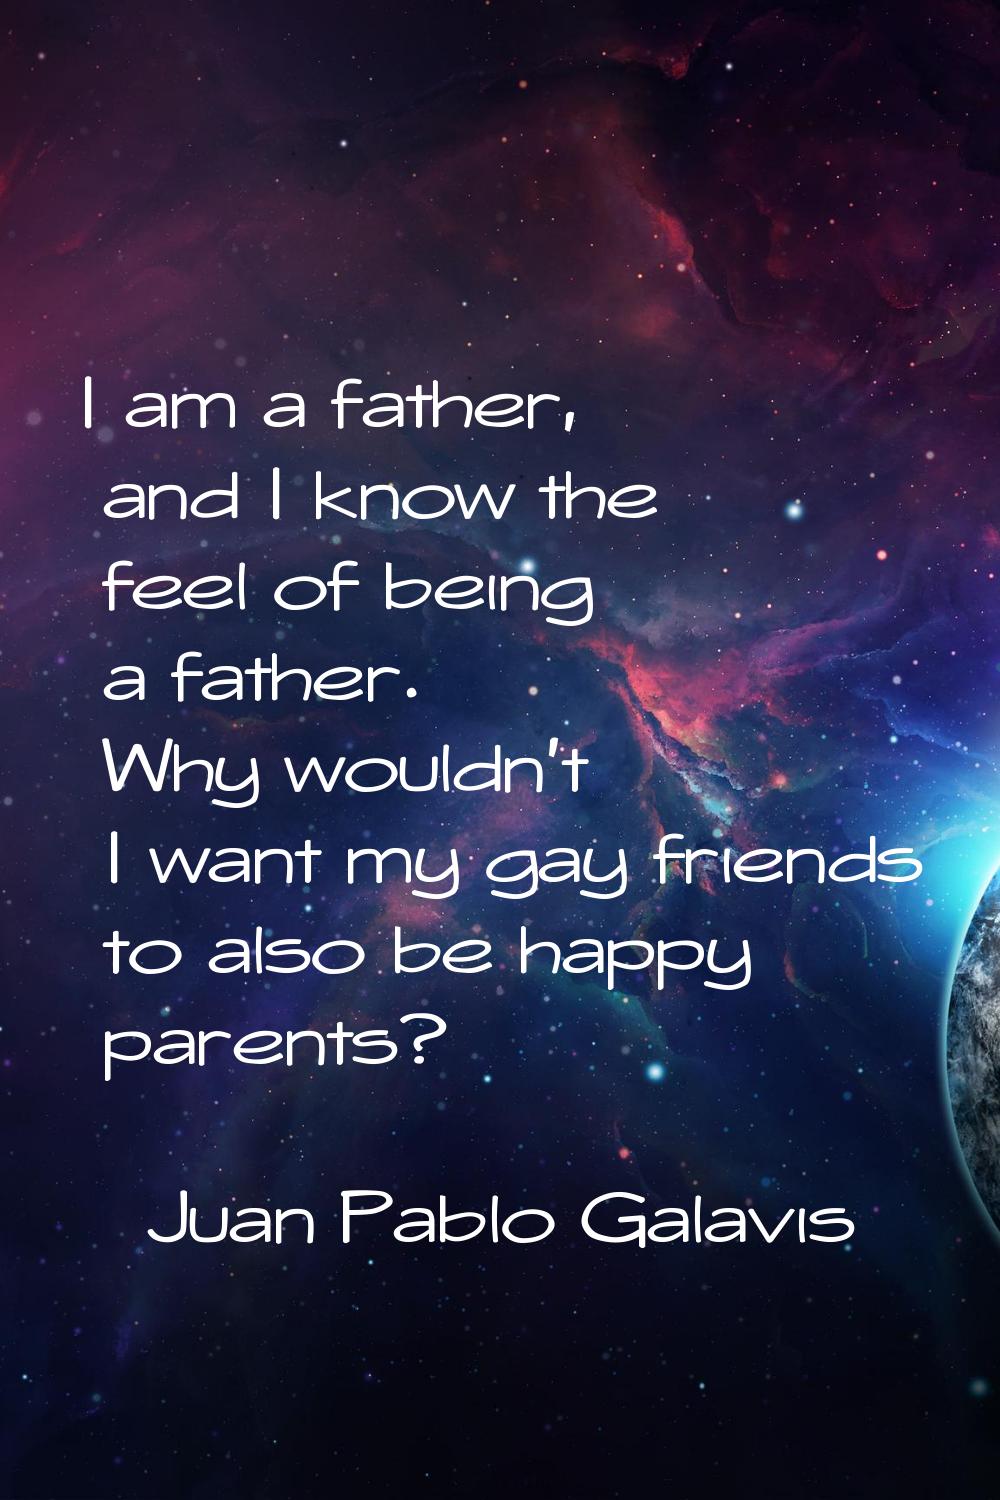 I am a father, and I know the feel of being a father. Why wouldn't I want my gay friends to also be